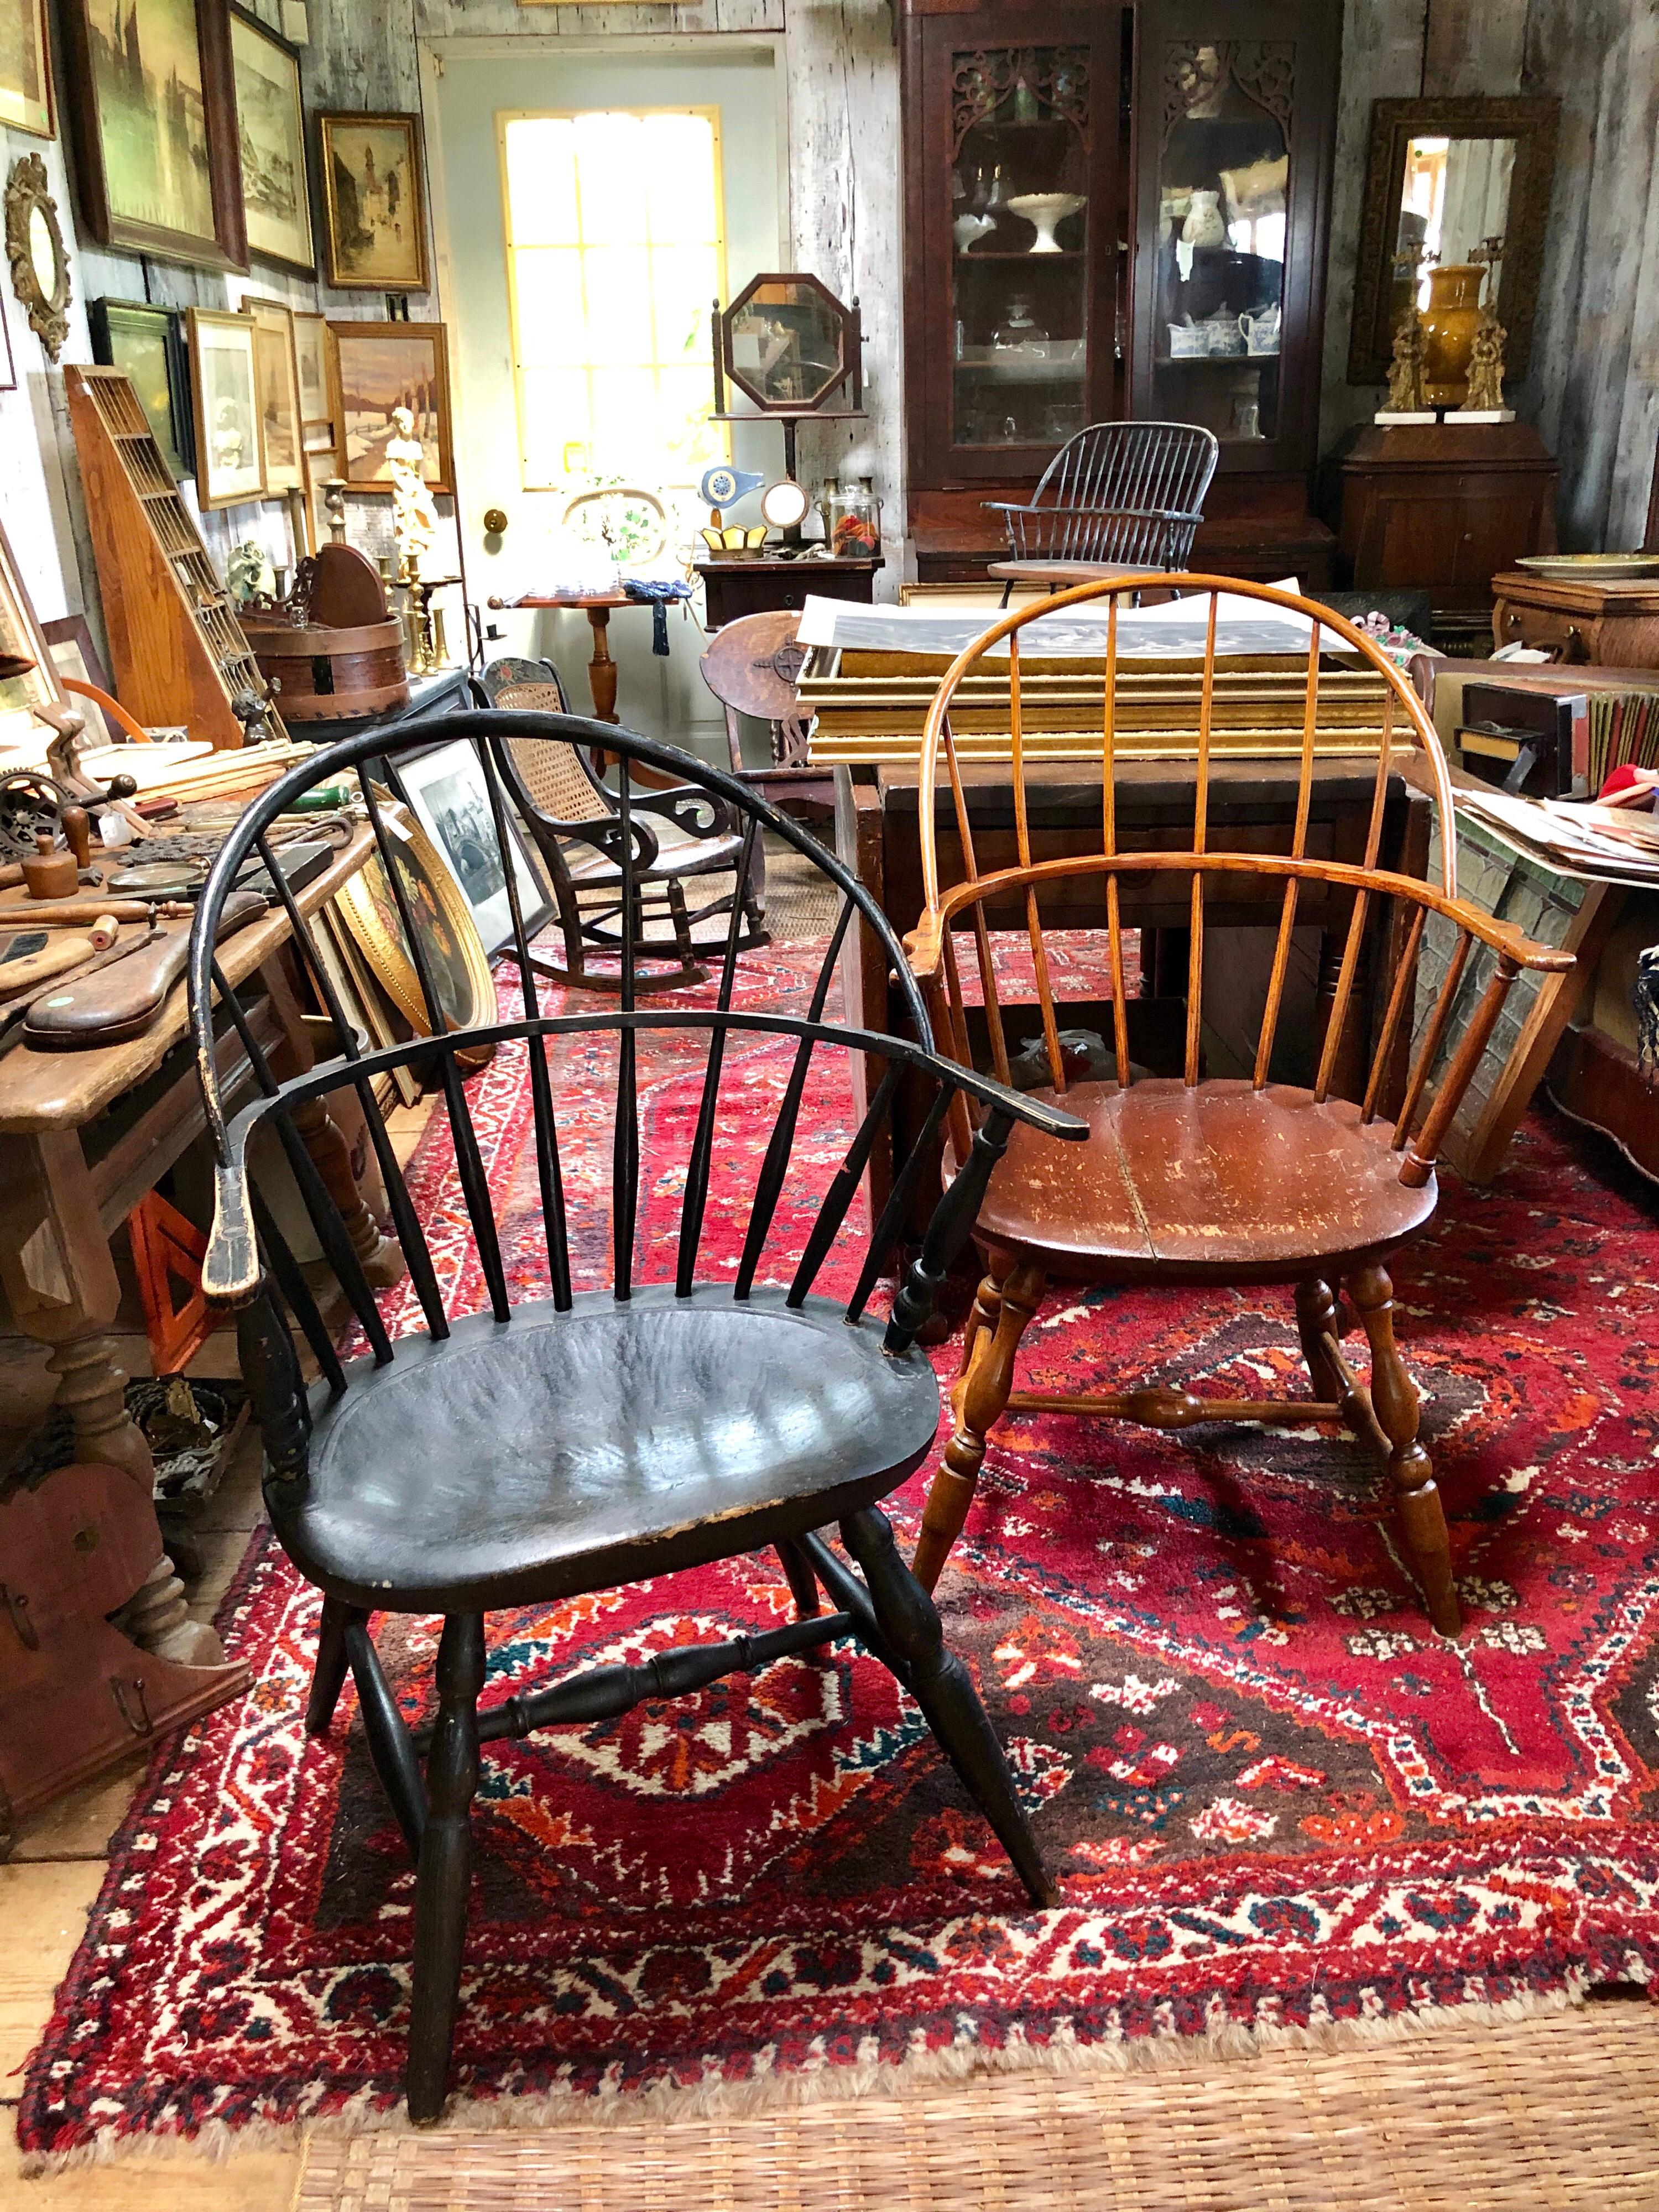 Early 1800s Windsor chair, with continuous wood hoop back and arms. Wide saddle seat and H stretchers. All original. Seat repaired, see photos. Lovely color.

American New England
1840s
Oak and hickory

37.5” tall
17.75” wide at base